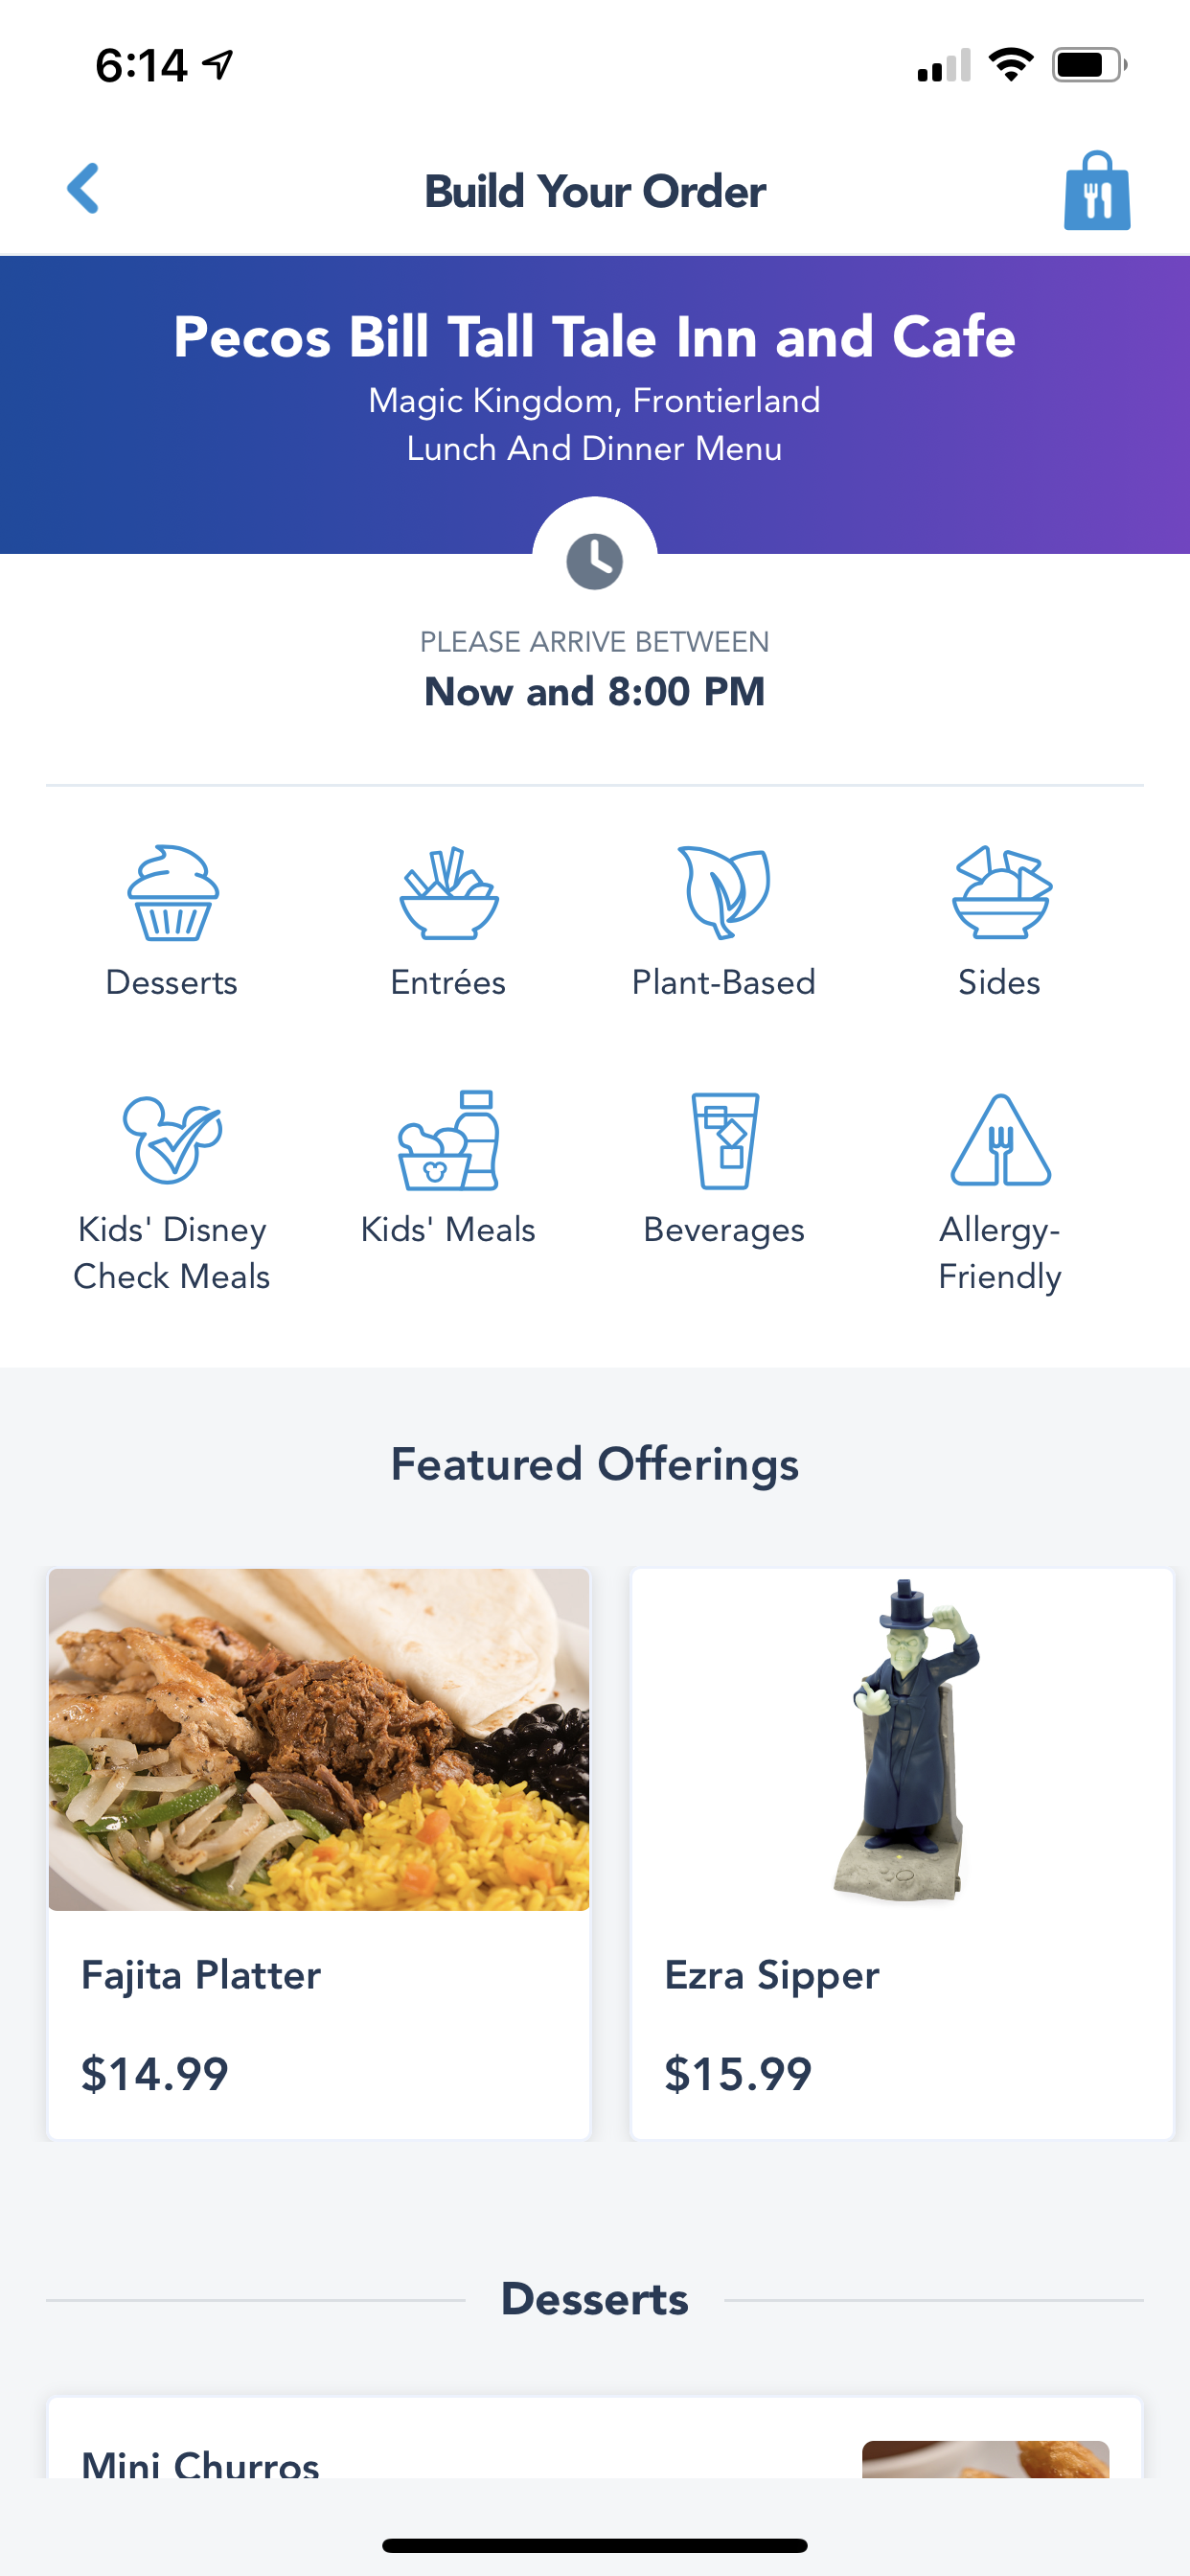 my disney experience app mobile ordering page - building an order